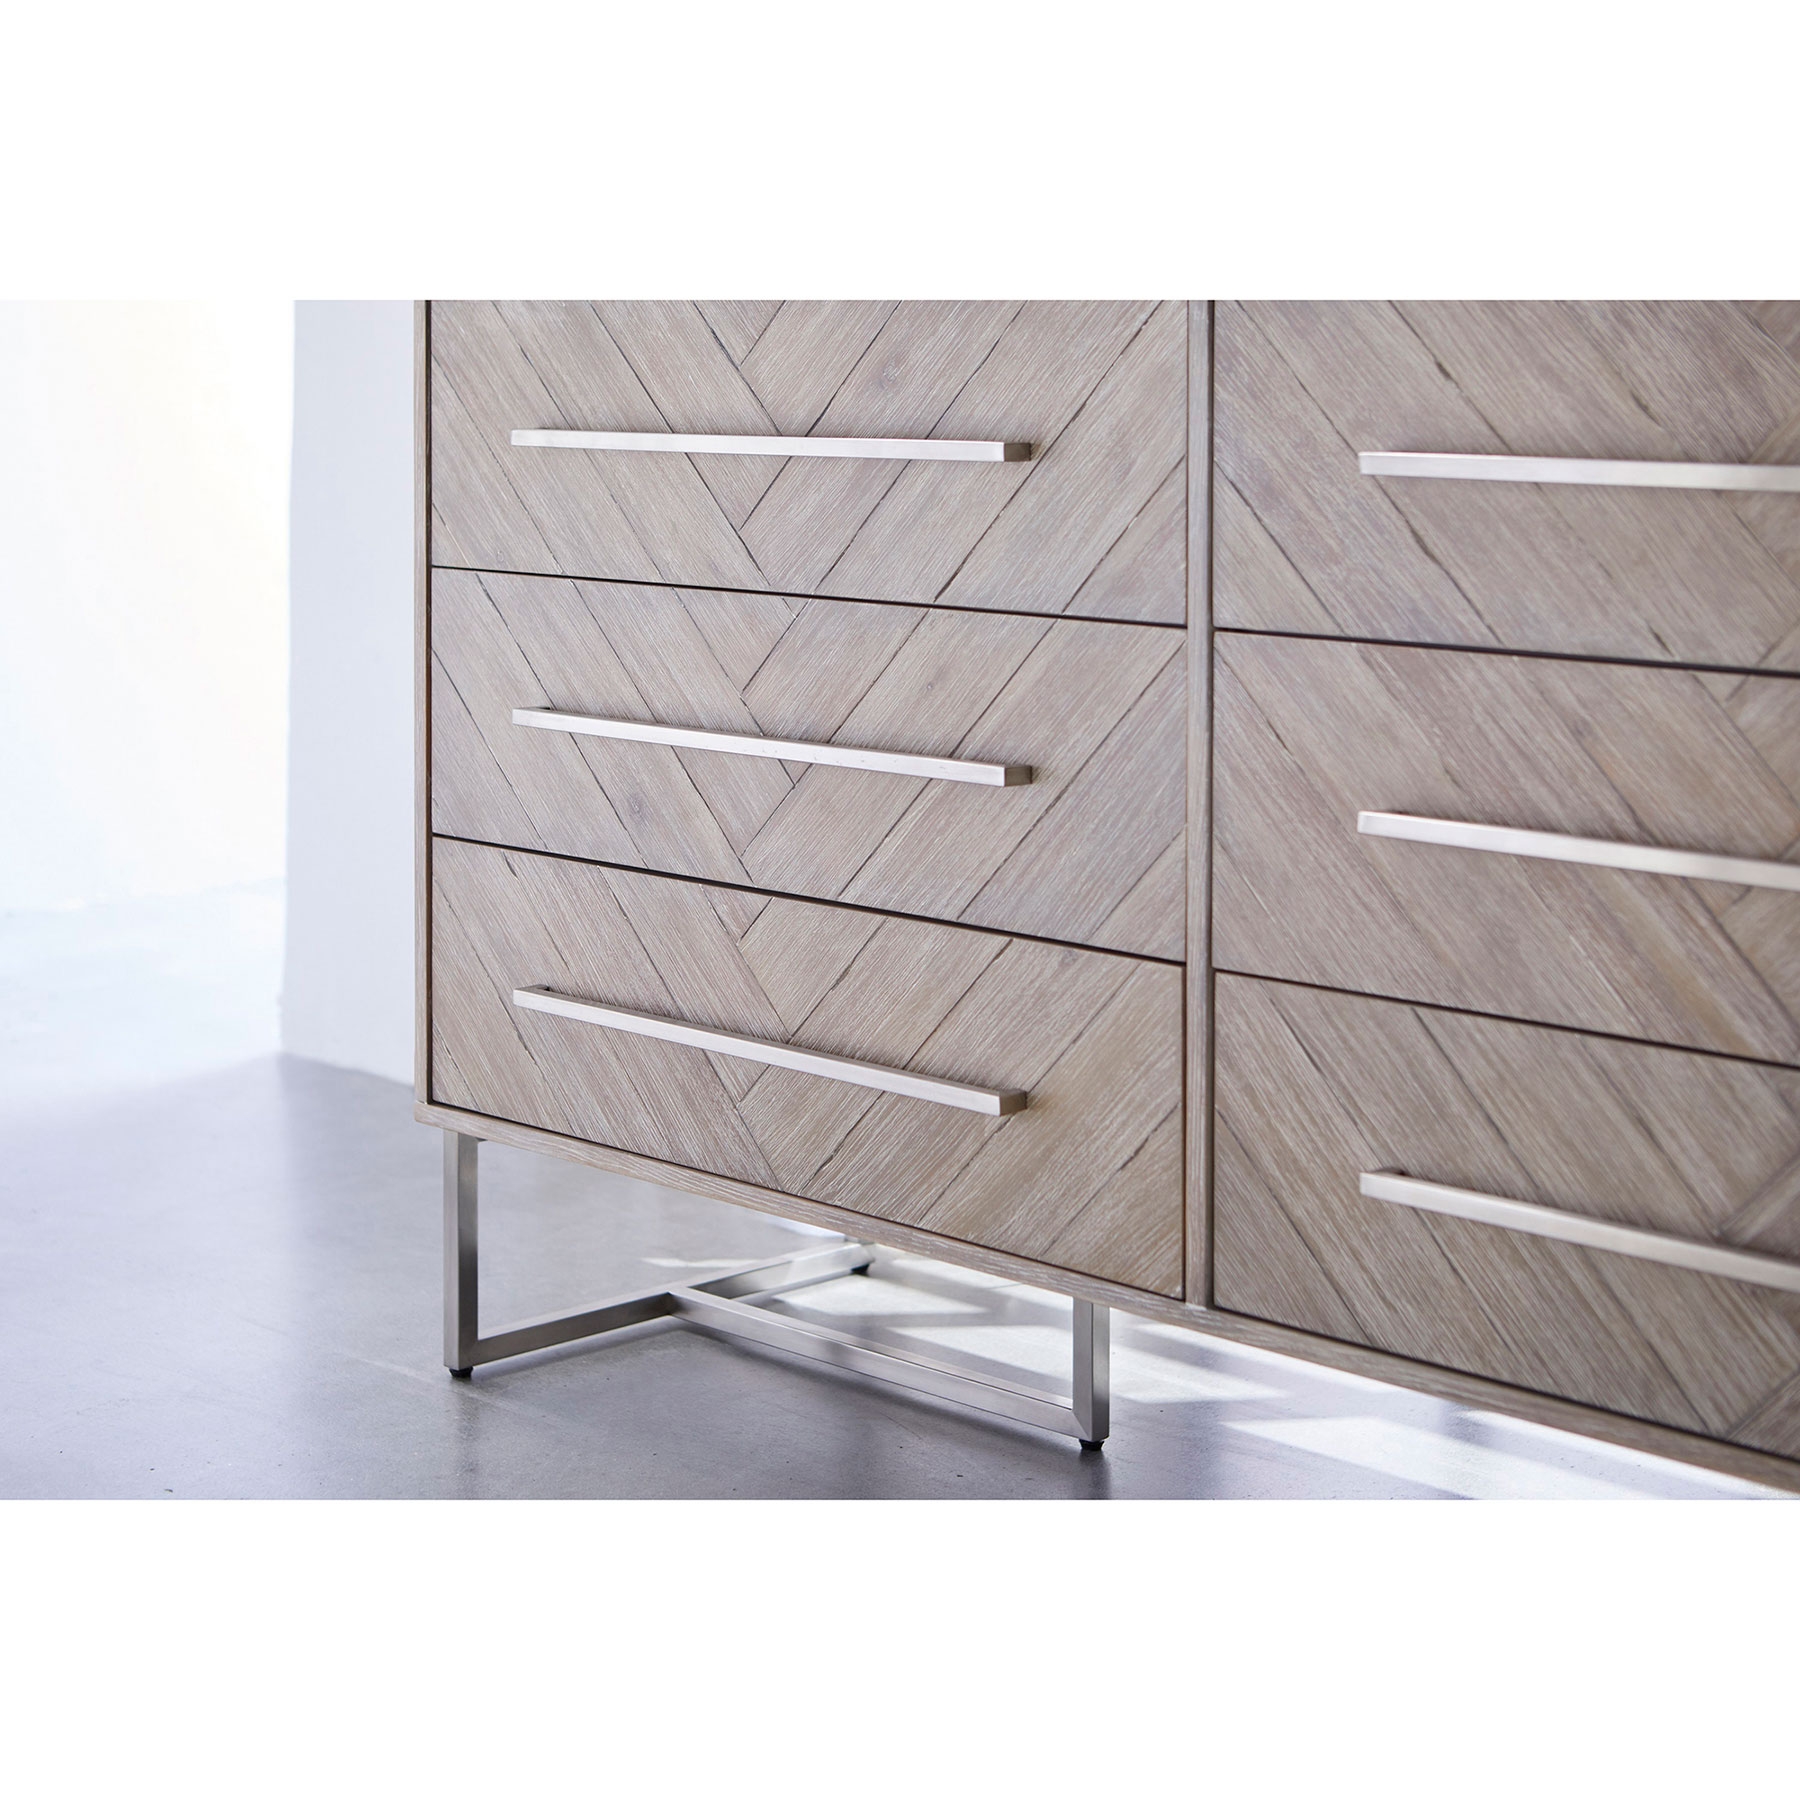 Moris Modern Classic 6-Drawer Stainless Steel Pulls Natural Grey Double Dresser - Image 3